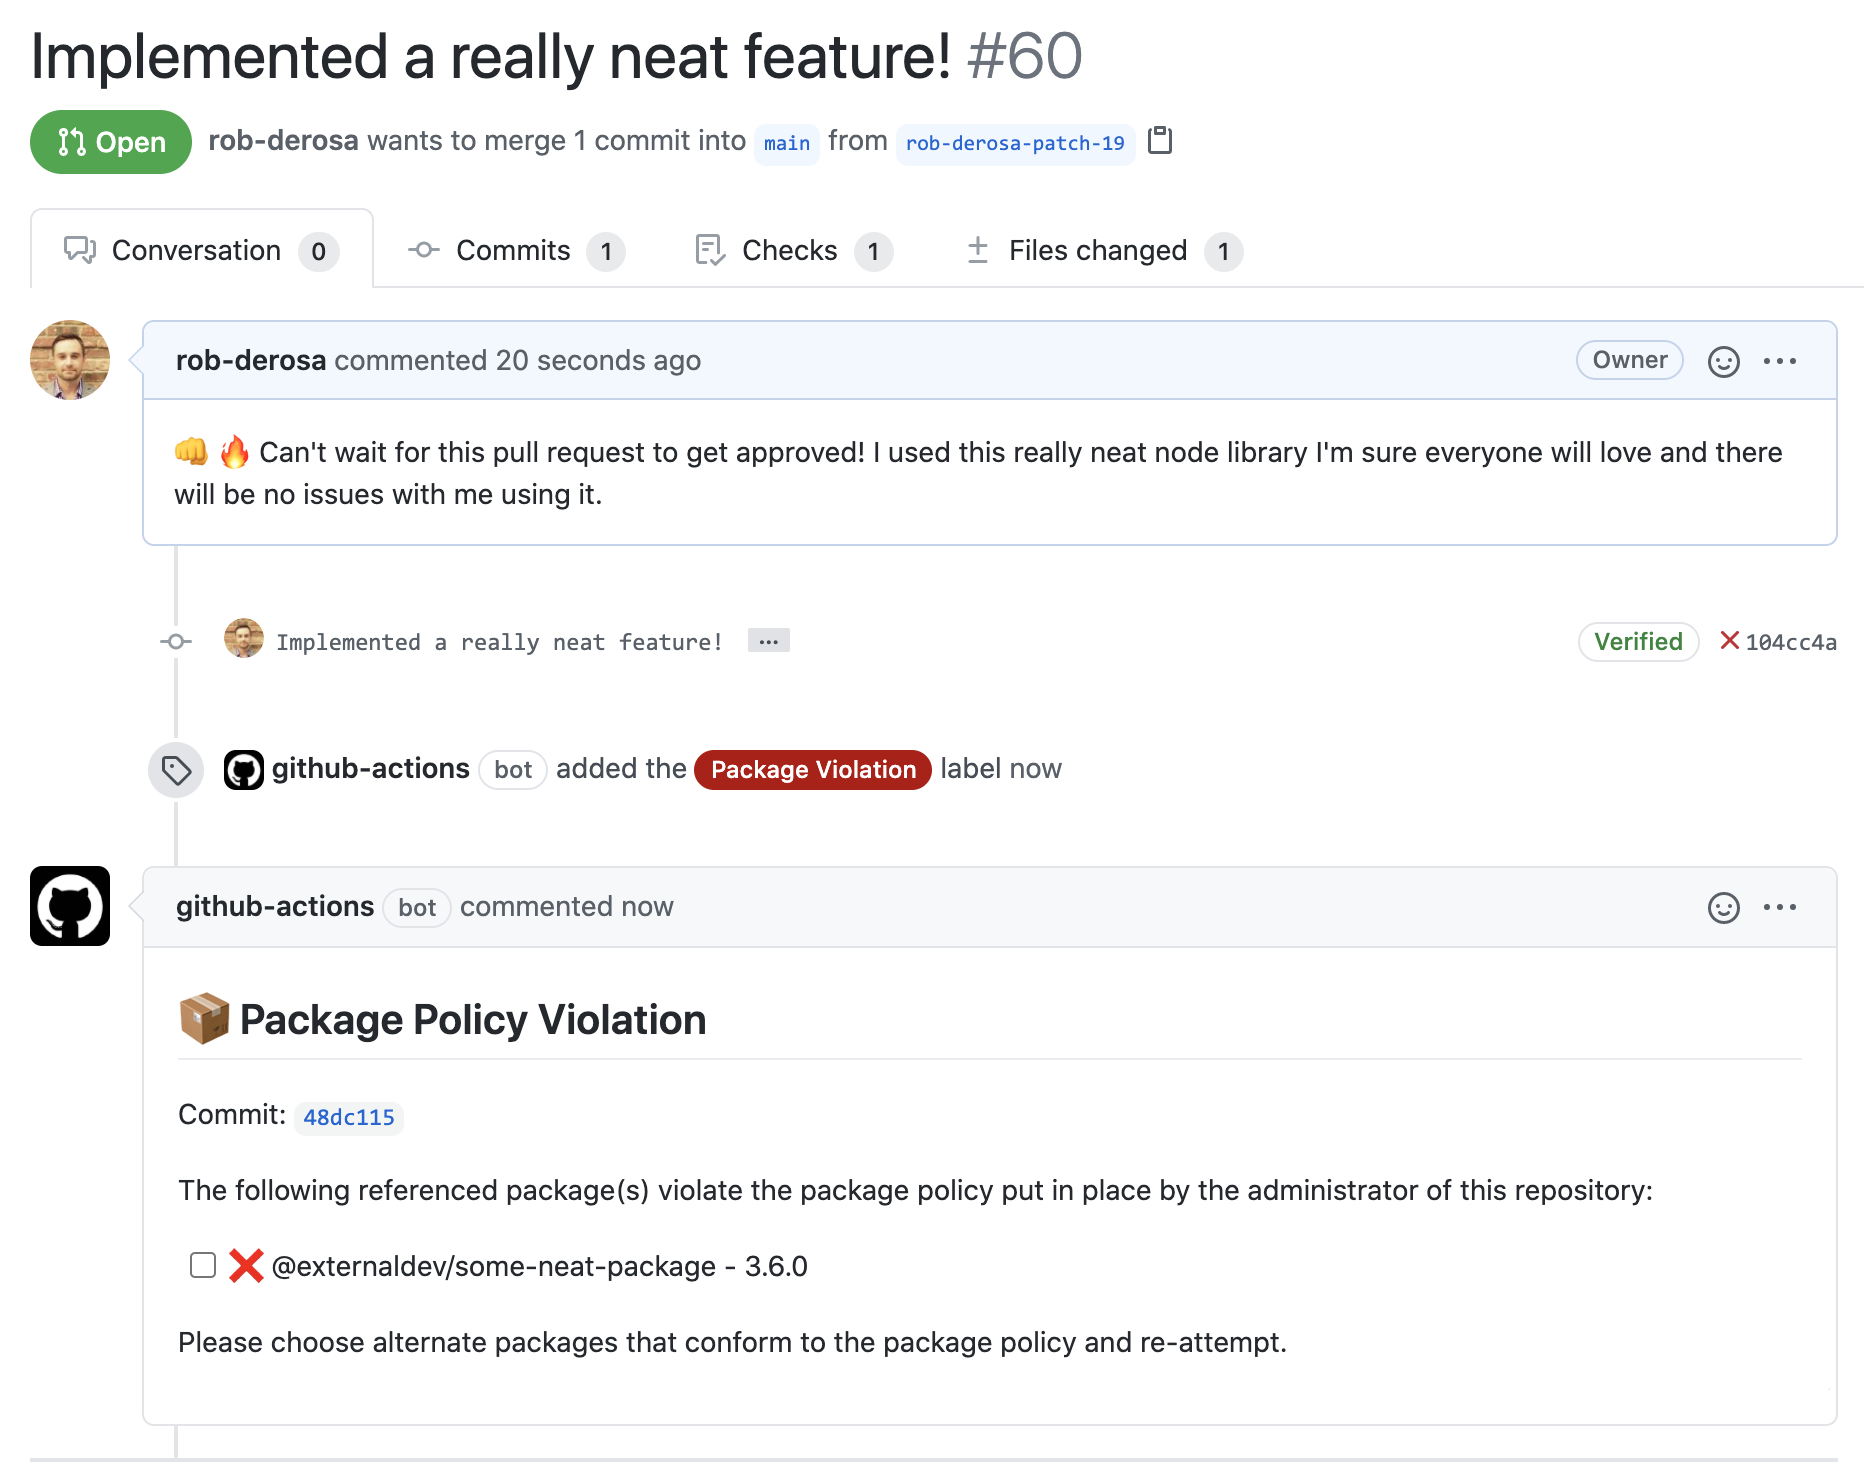 Pull request commented on due to violation